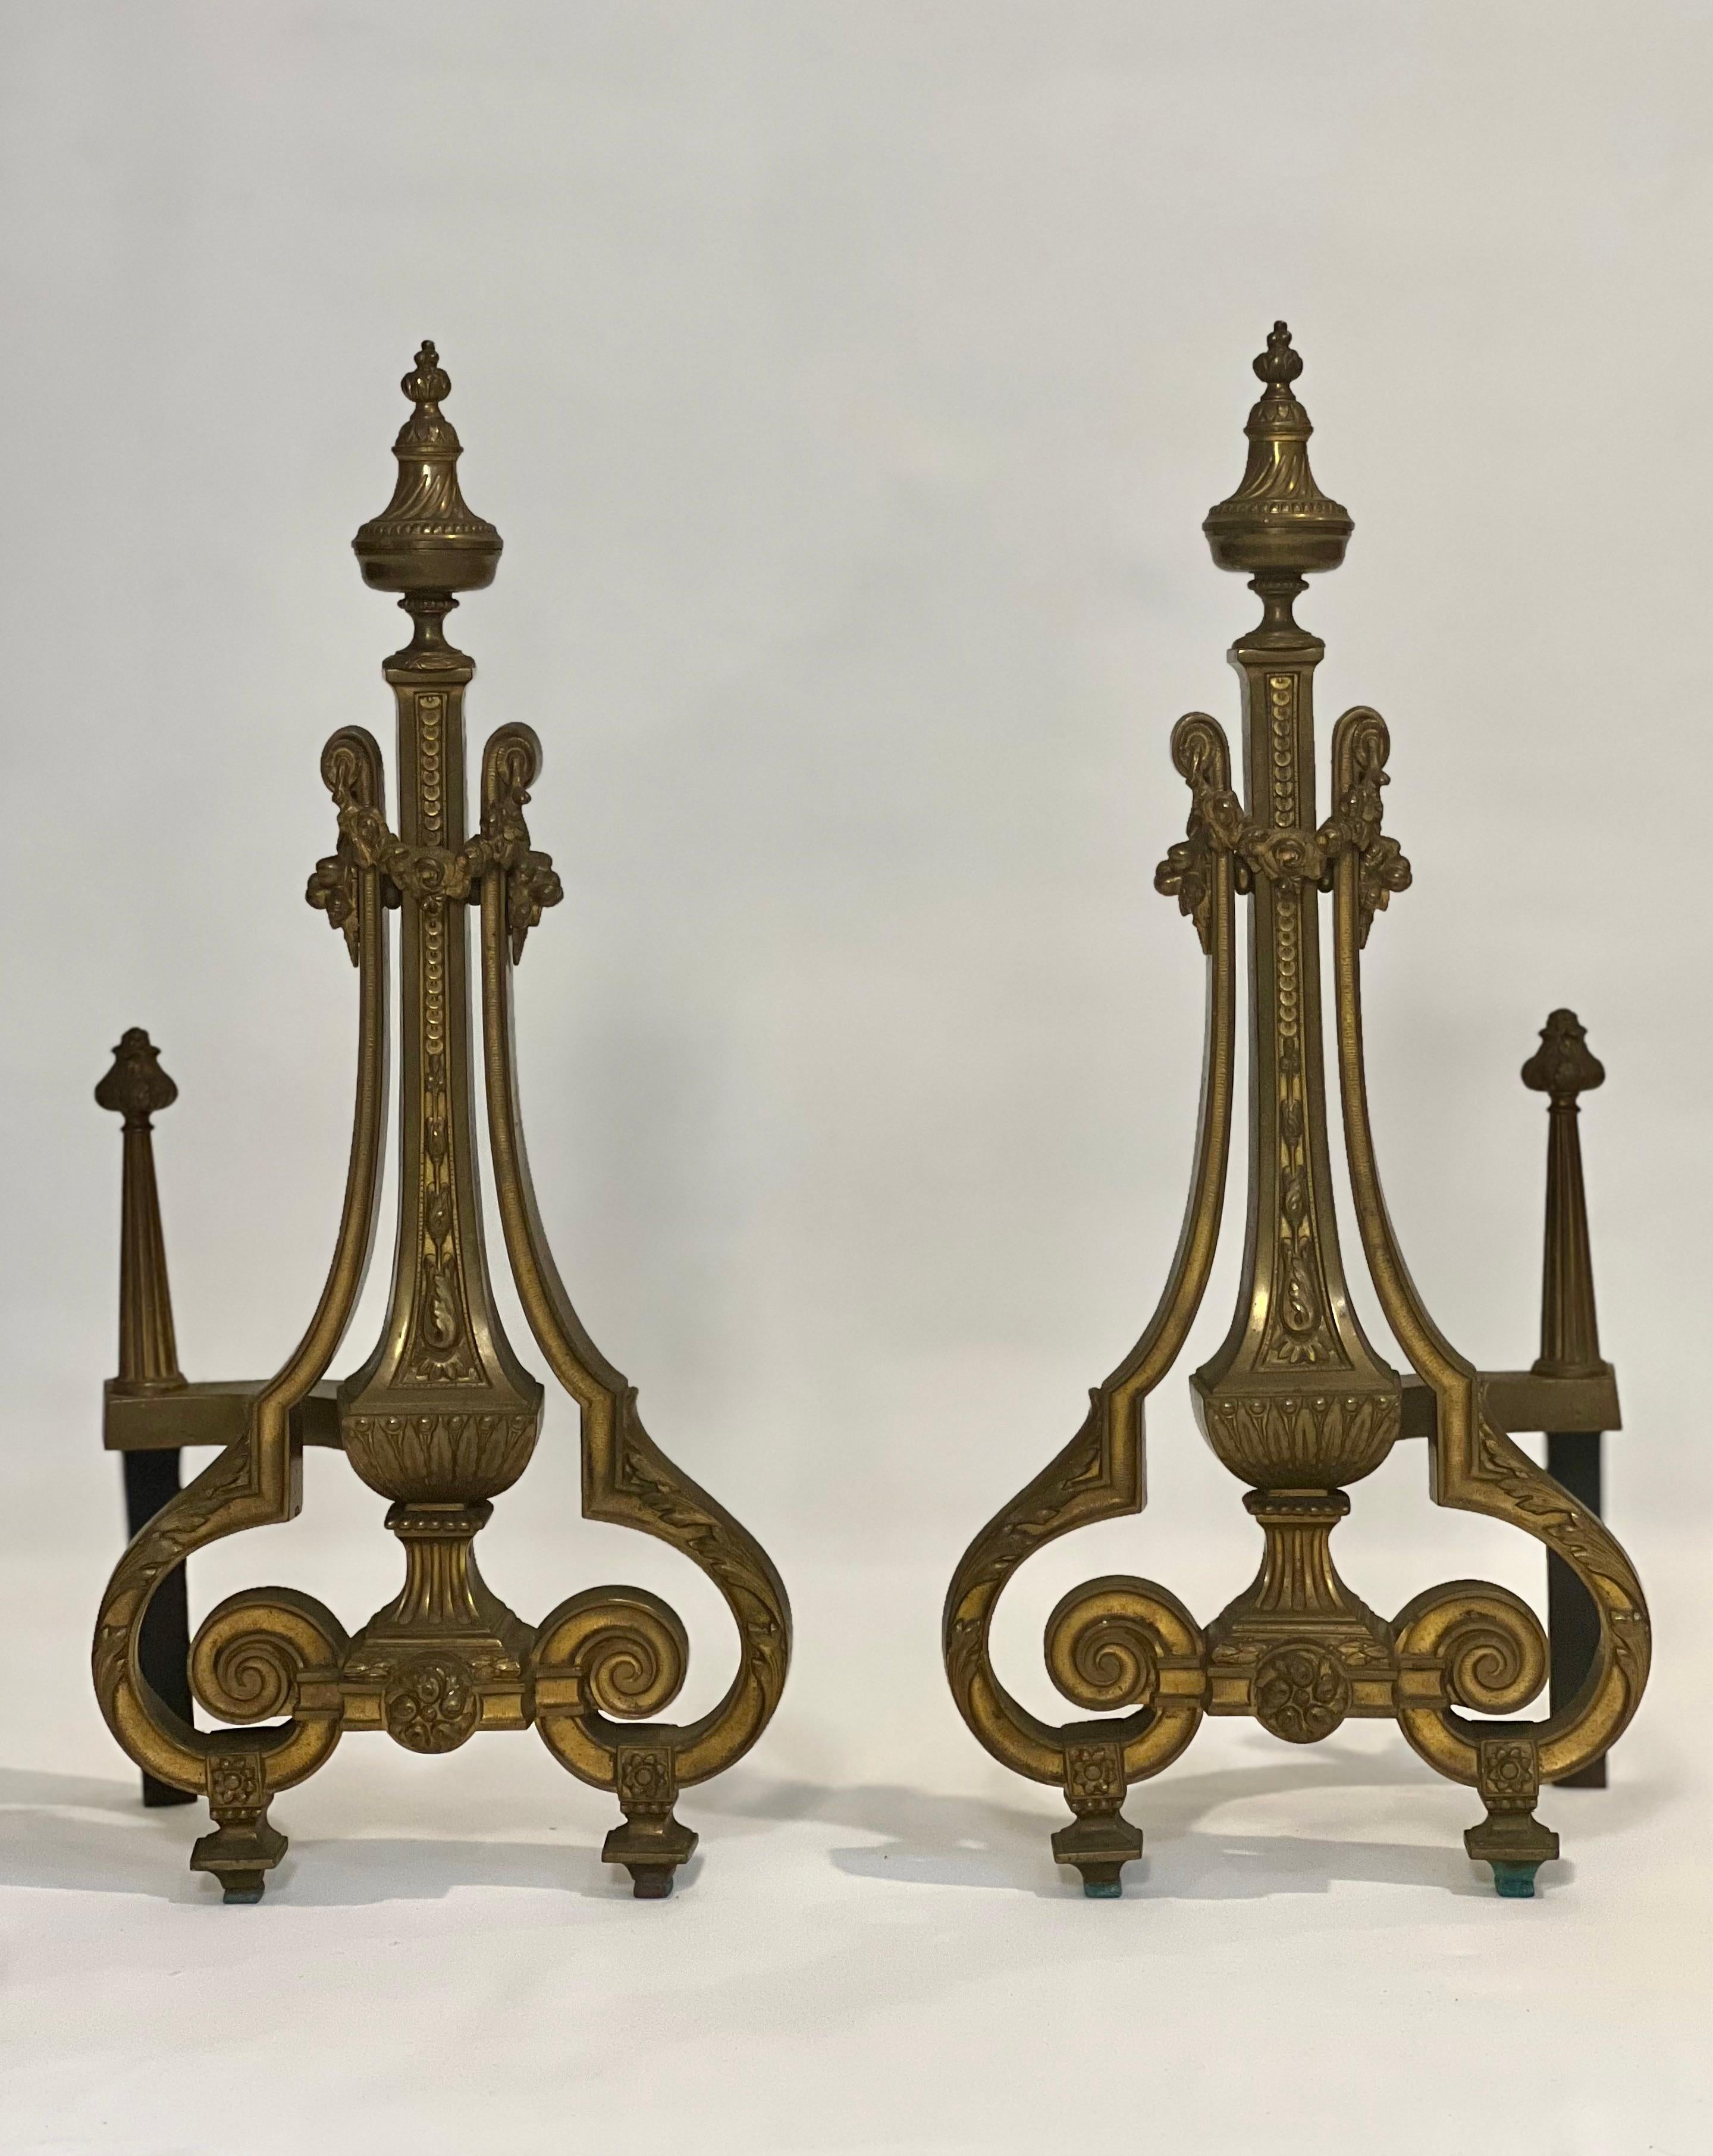 Neoclassical French Empire style gilt brass andirons by William H. Jackson Company, early 20th century.

Incredibly detailed pair from the finials down to the feet featuring floral and foliate motifs. Beautifully shaped with a well-balanced form and